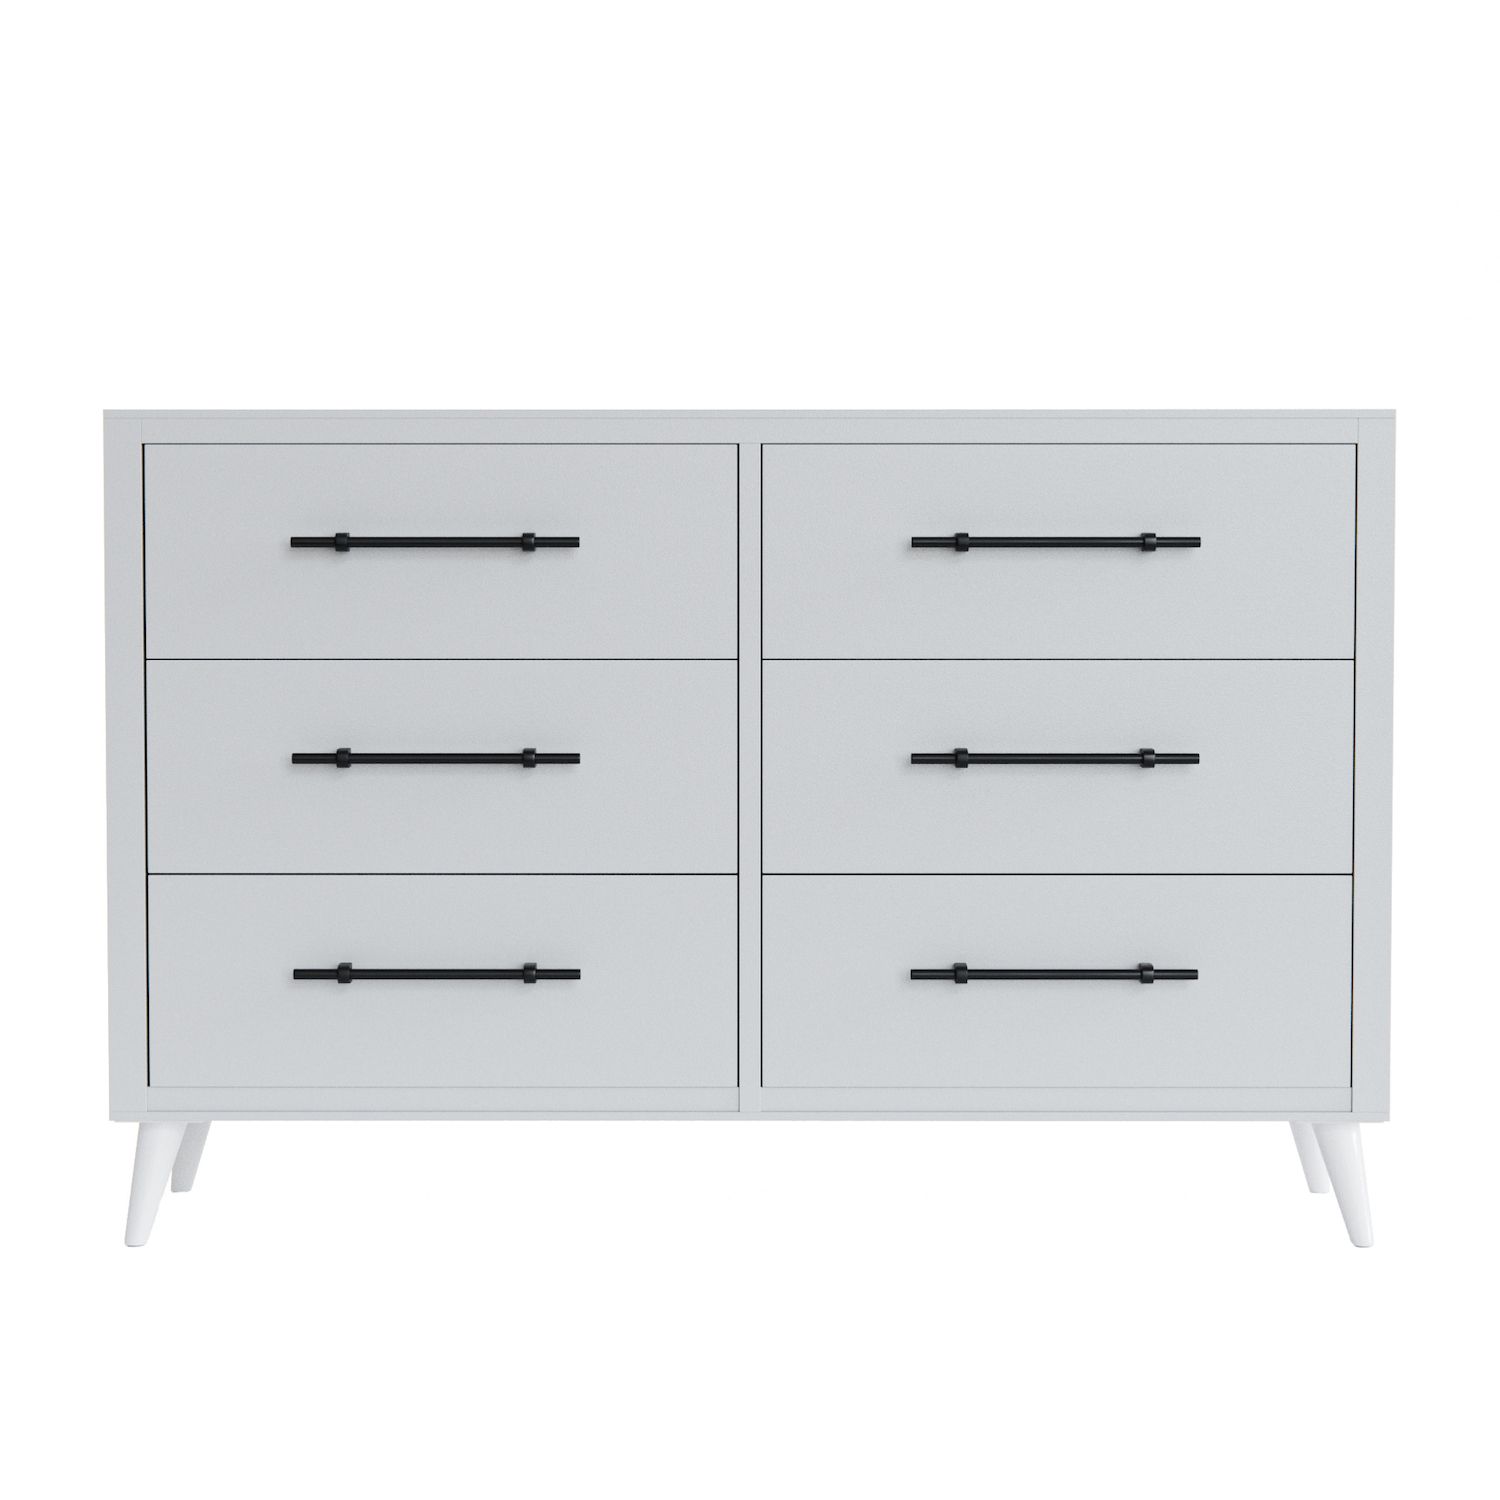 Image for Dream Collection Mid-Century Modern 6-Drawer Dresser at Kohl's.